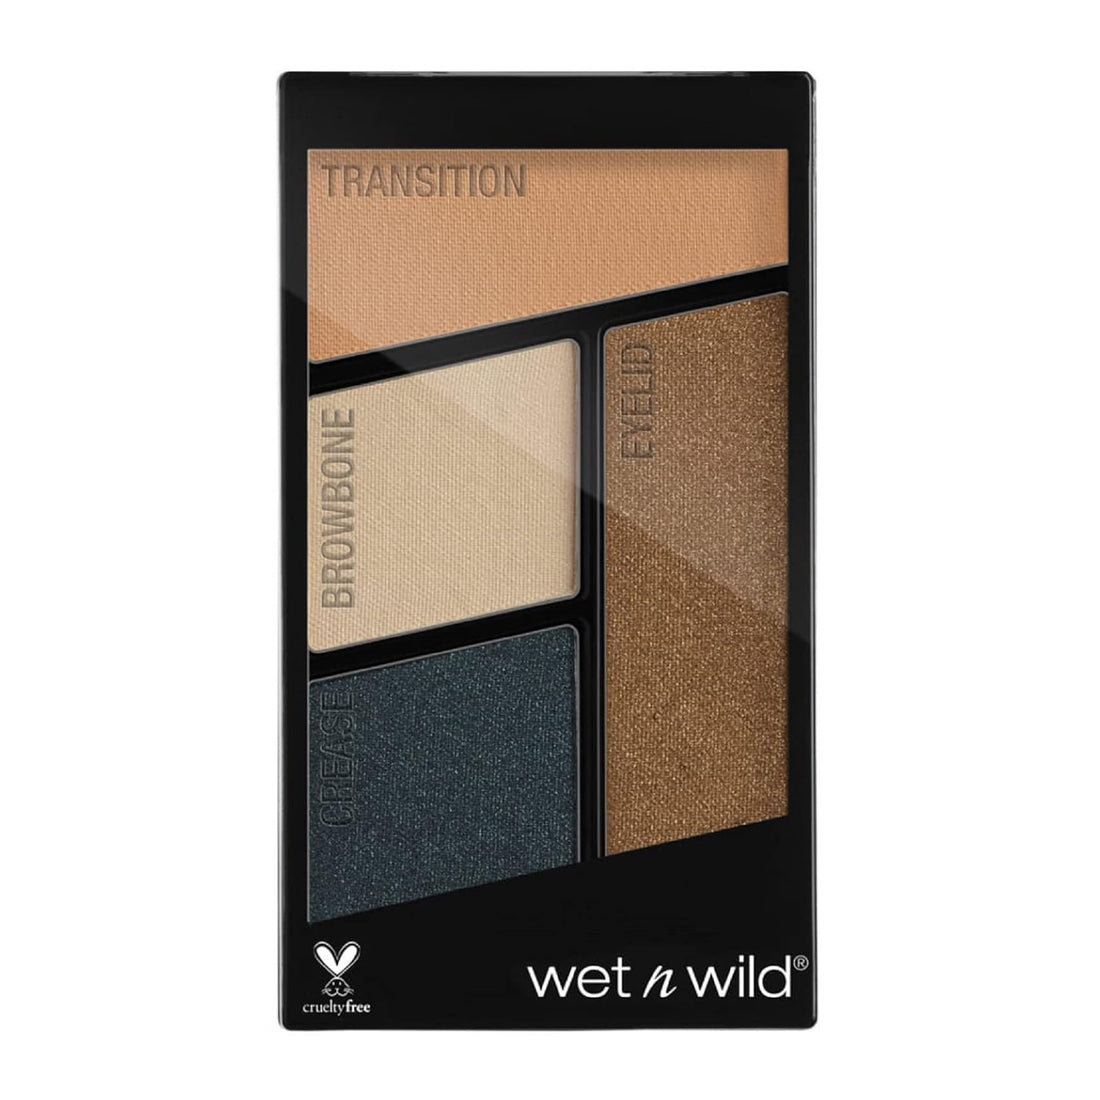 Wet n Wild Color Icon Eyeshadow Quad (4.5g) - Hooked On Vinyl